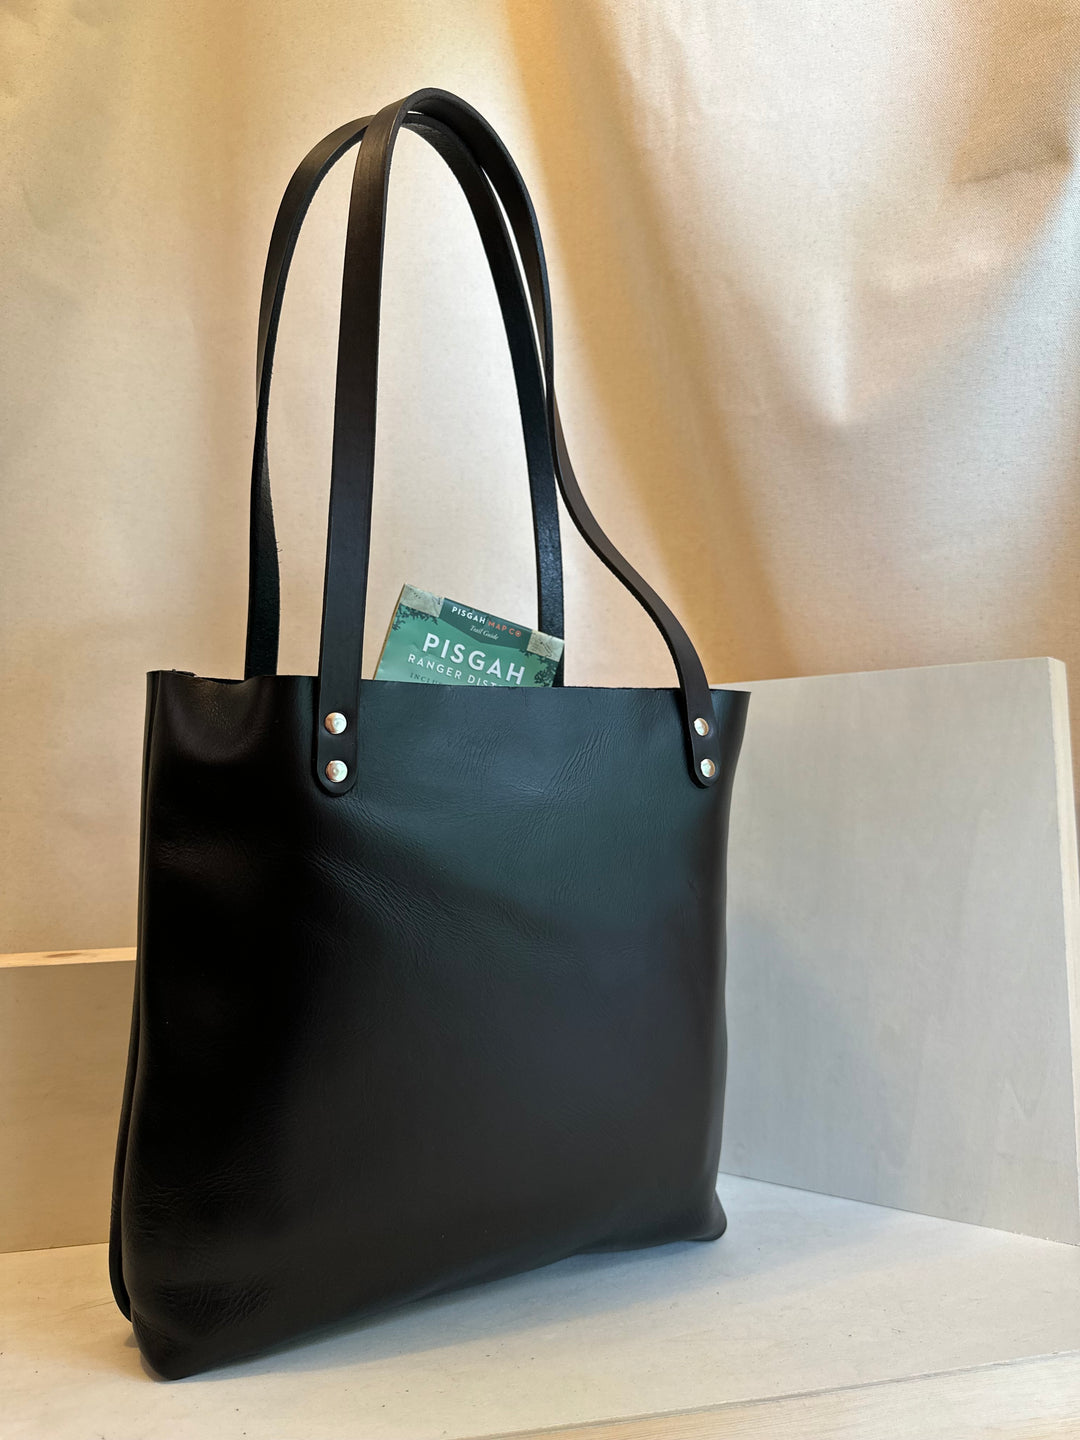 Our handmade Black Portfolio Leather Tote Bag is hand crafted in our Asheville, NC studio.   Made of the finest quality top grain Horween Chrome XL solid leather. It is our compact tote that can carry anything from top secret dossiers to mini bottles for apres-anything.  Made from the highest quality top grain, solid leather, this bag will outlast your sister's second and third marriages.  Black EDC Mini Leather Tote Bag